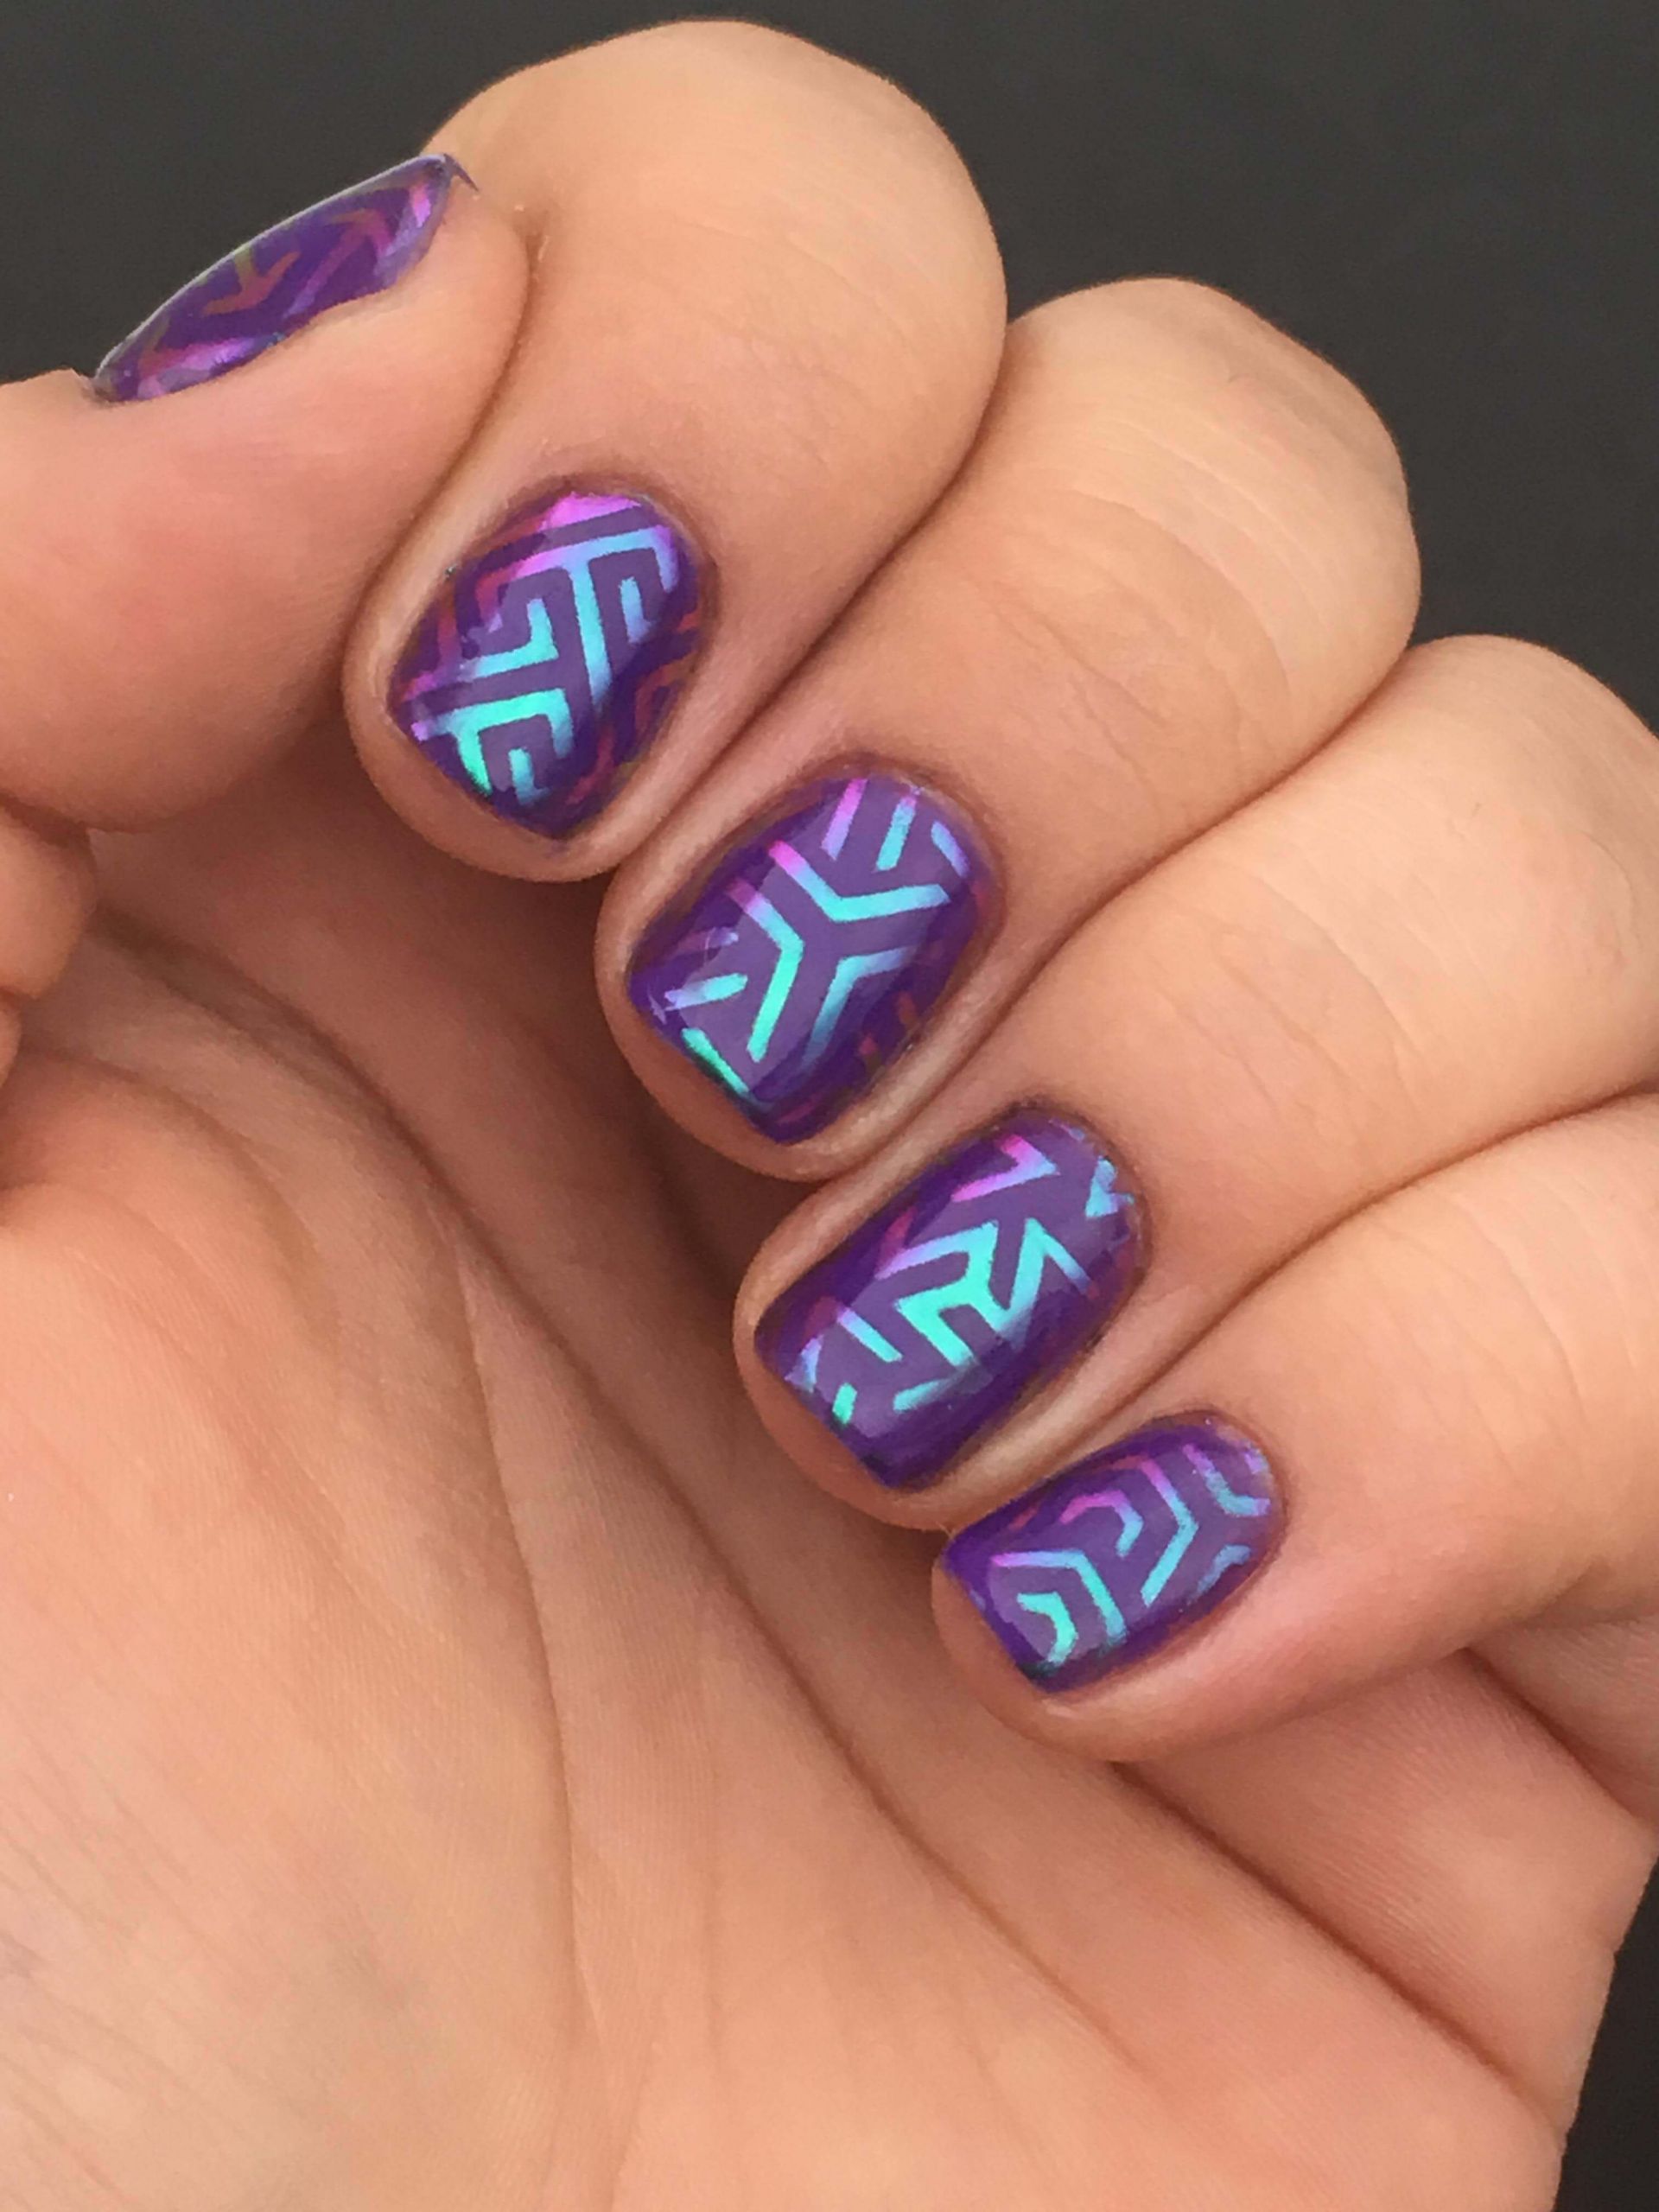 Sculpture Nail Designs
 Learn How To Make This Cool Geometric Nail Art With